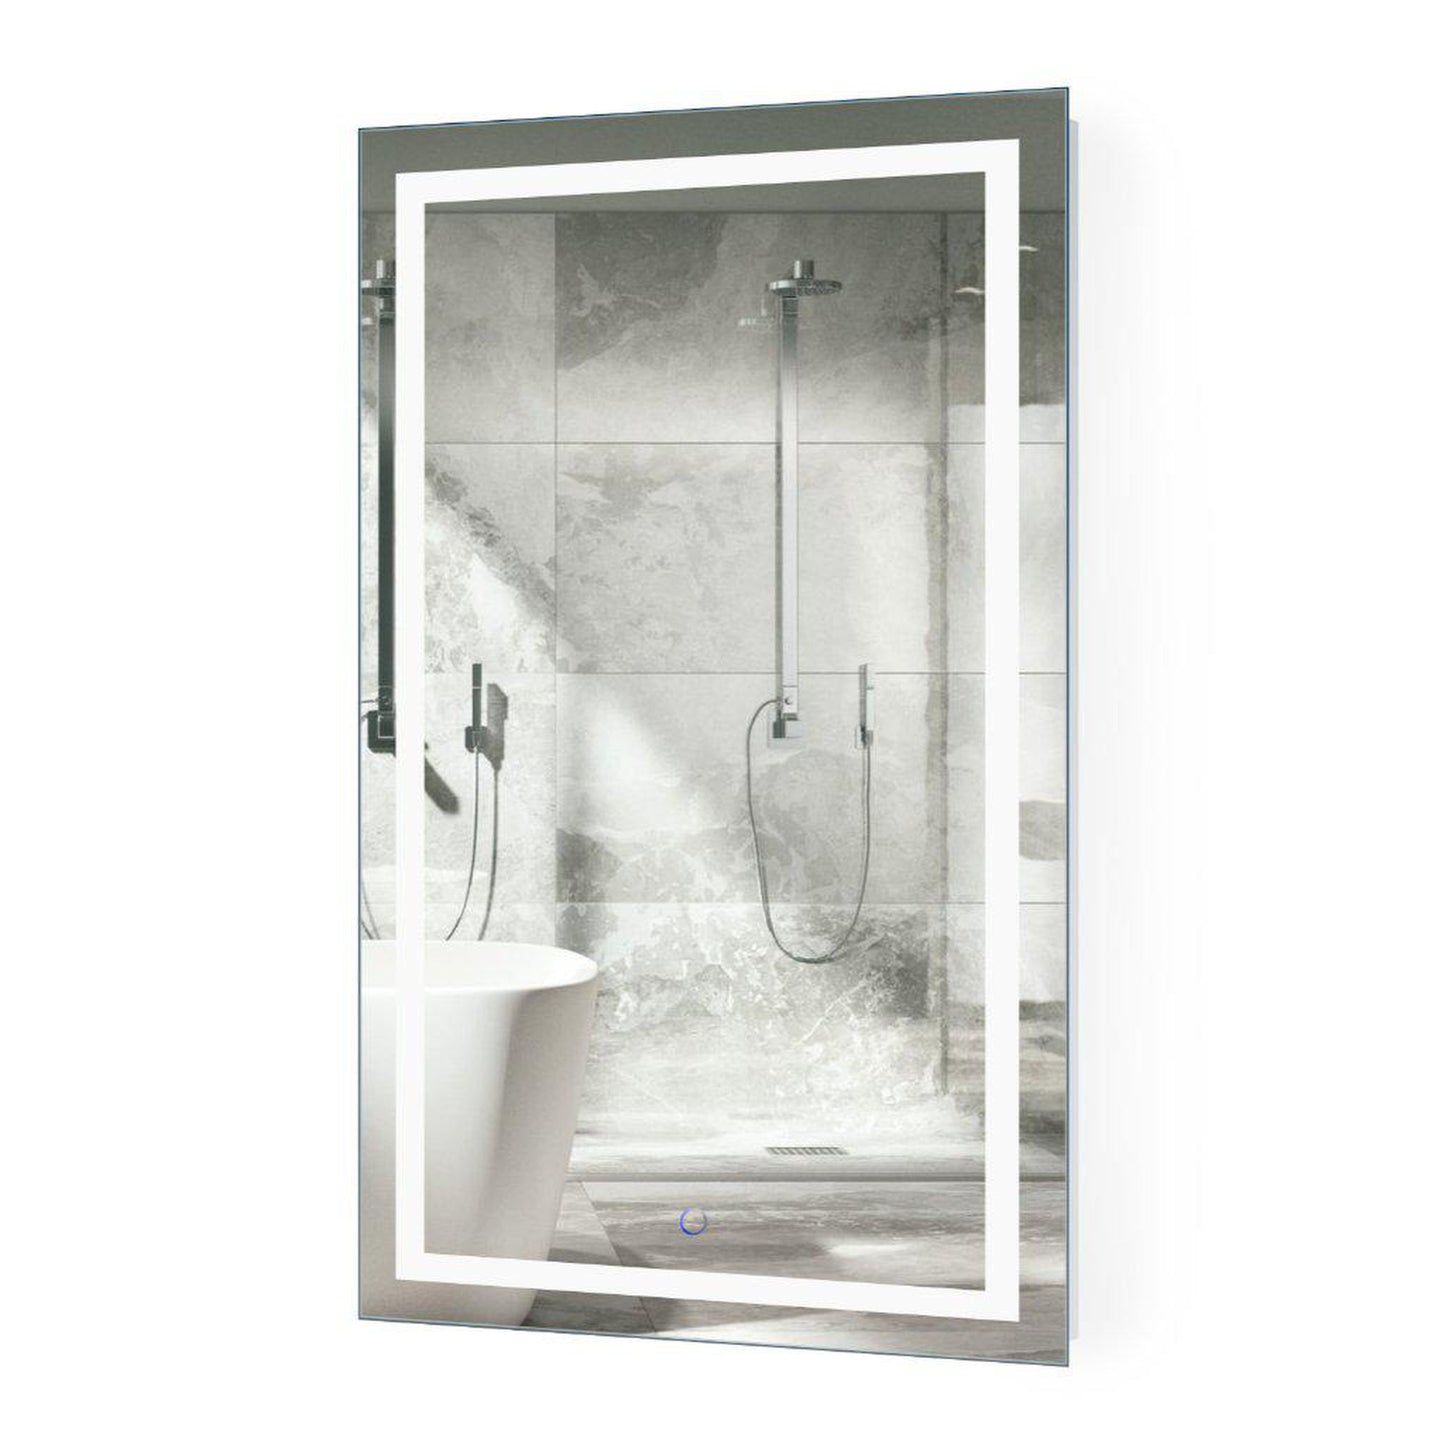 Krugg Reflections Icon 42” x 24” 5000K Rectangular Wall-Mounted Illuminated Silver Backed LED Mirror With Built-in Defogger and Touch Sensor On/Off Built-in Dimmer